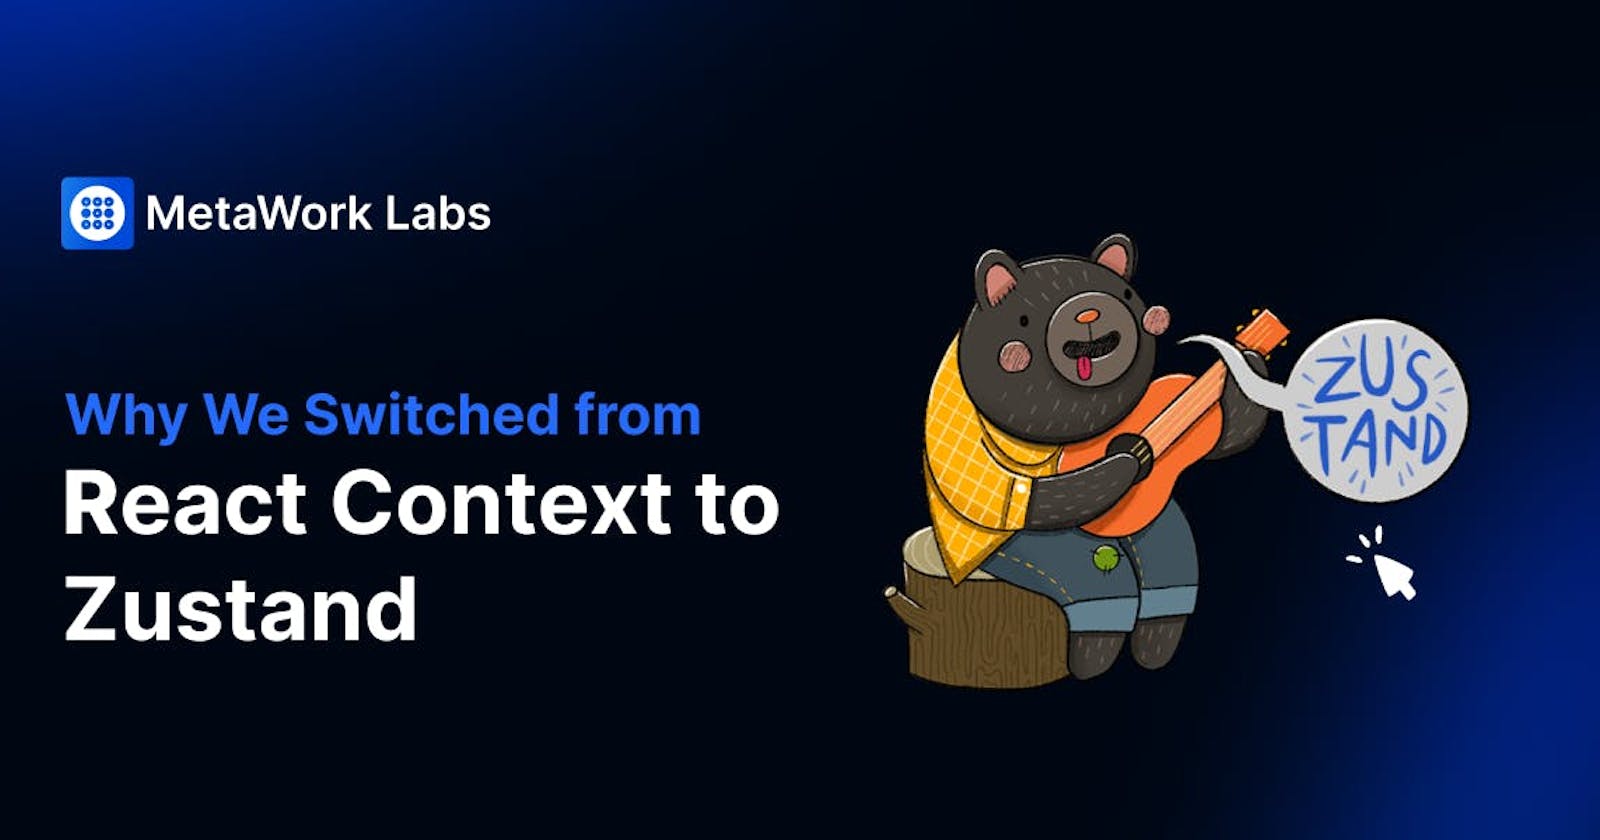 Why We Switched from React Context to Zustand